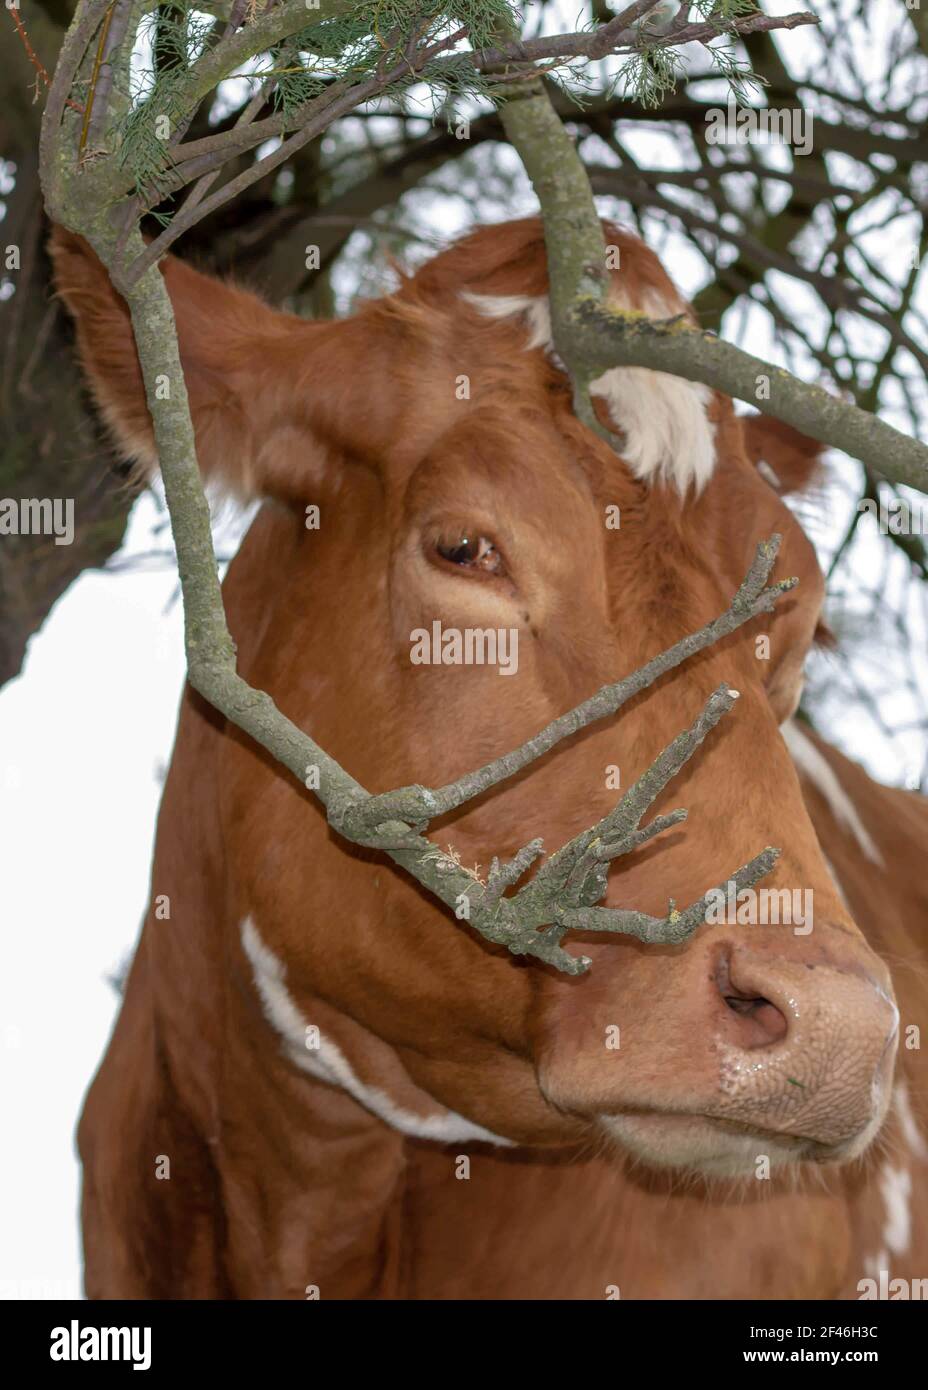 pretty brown cow peering through the branches Stock Photo